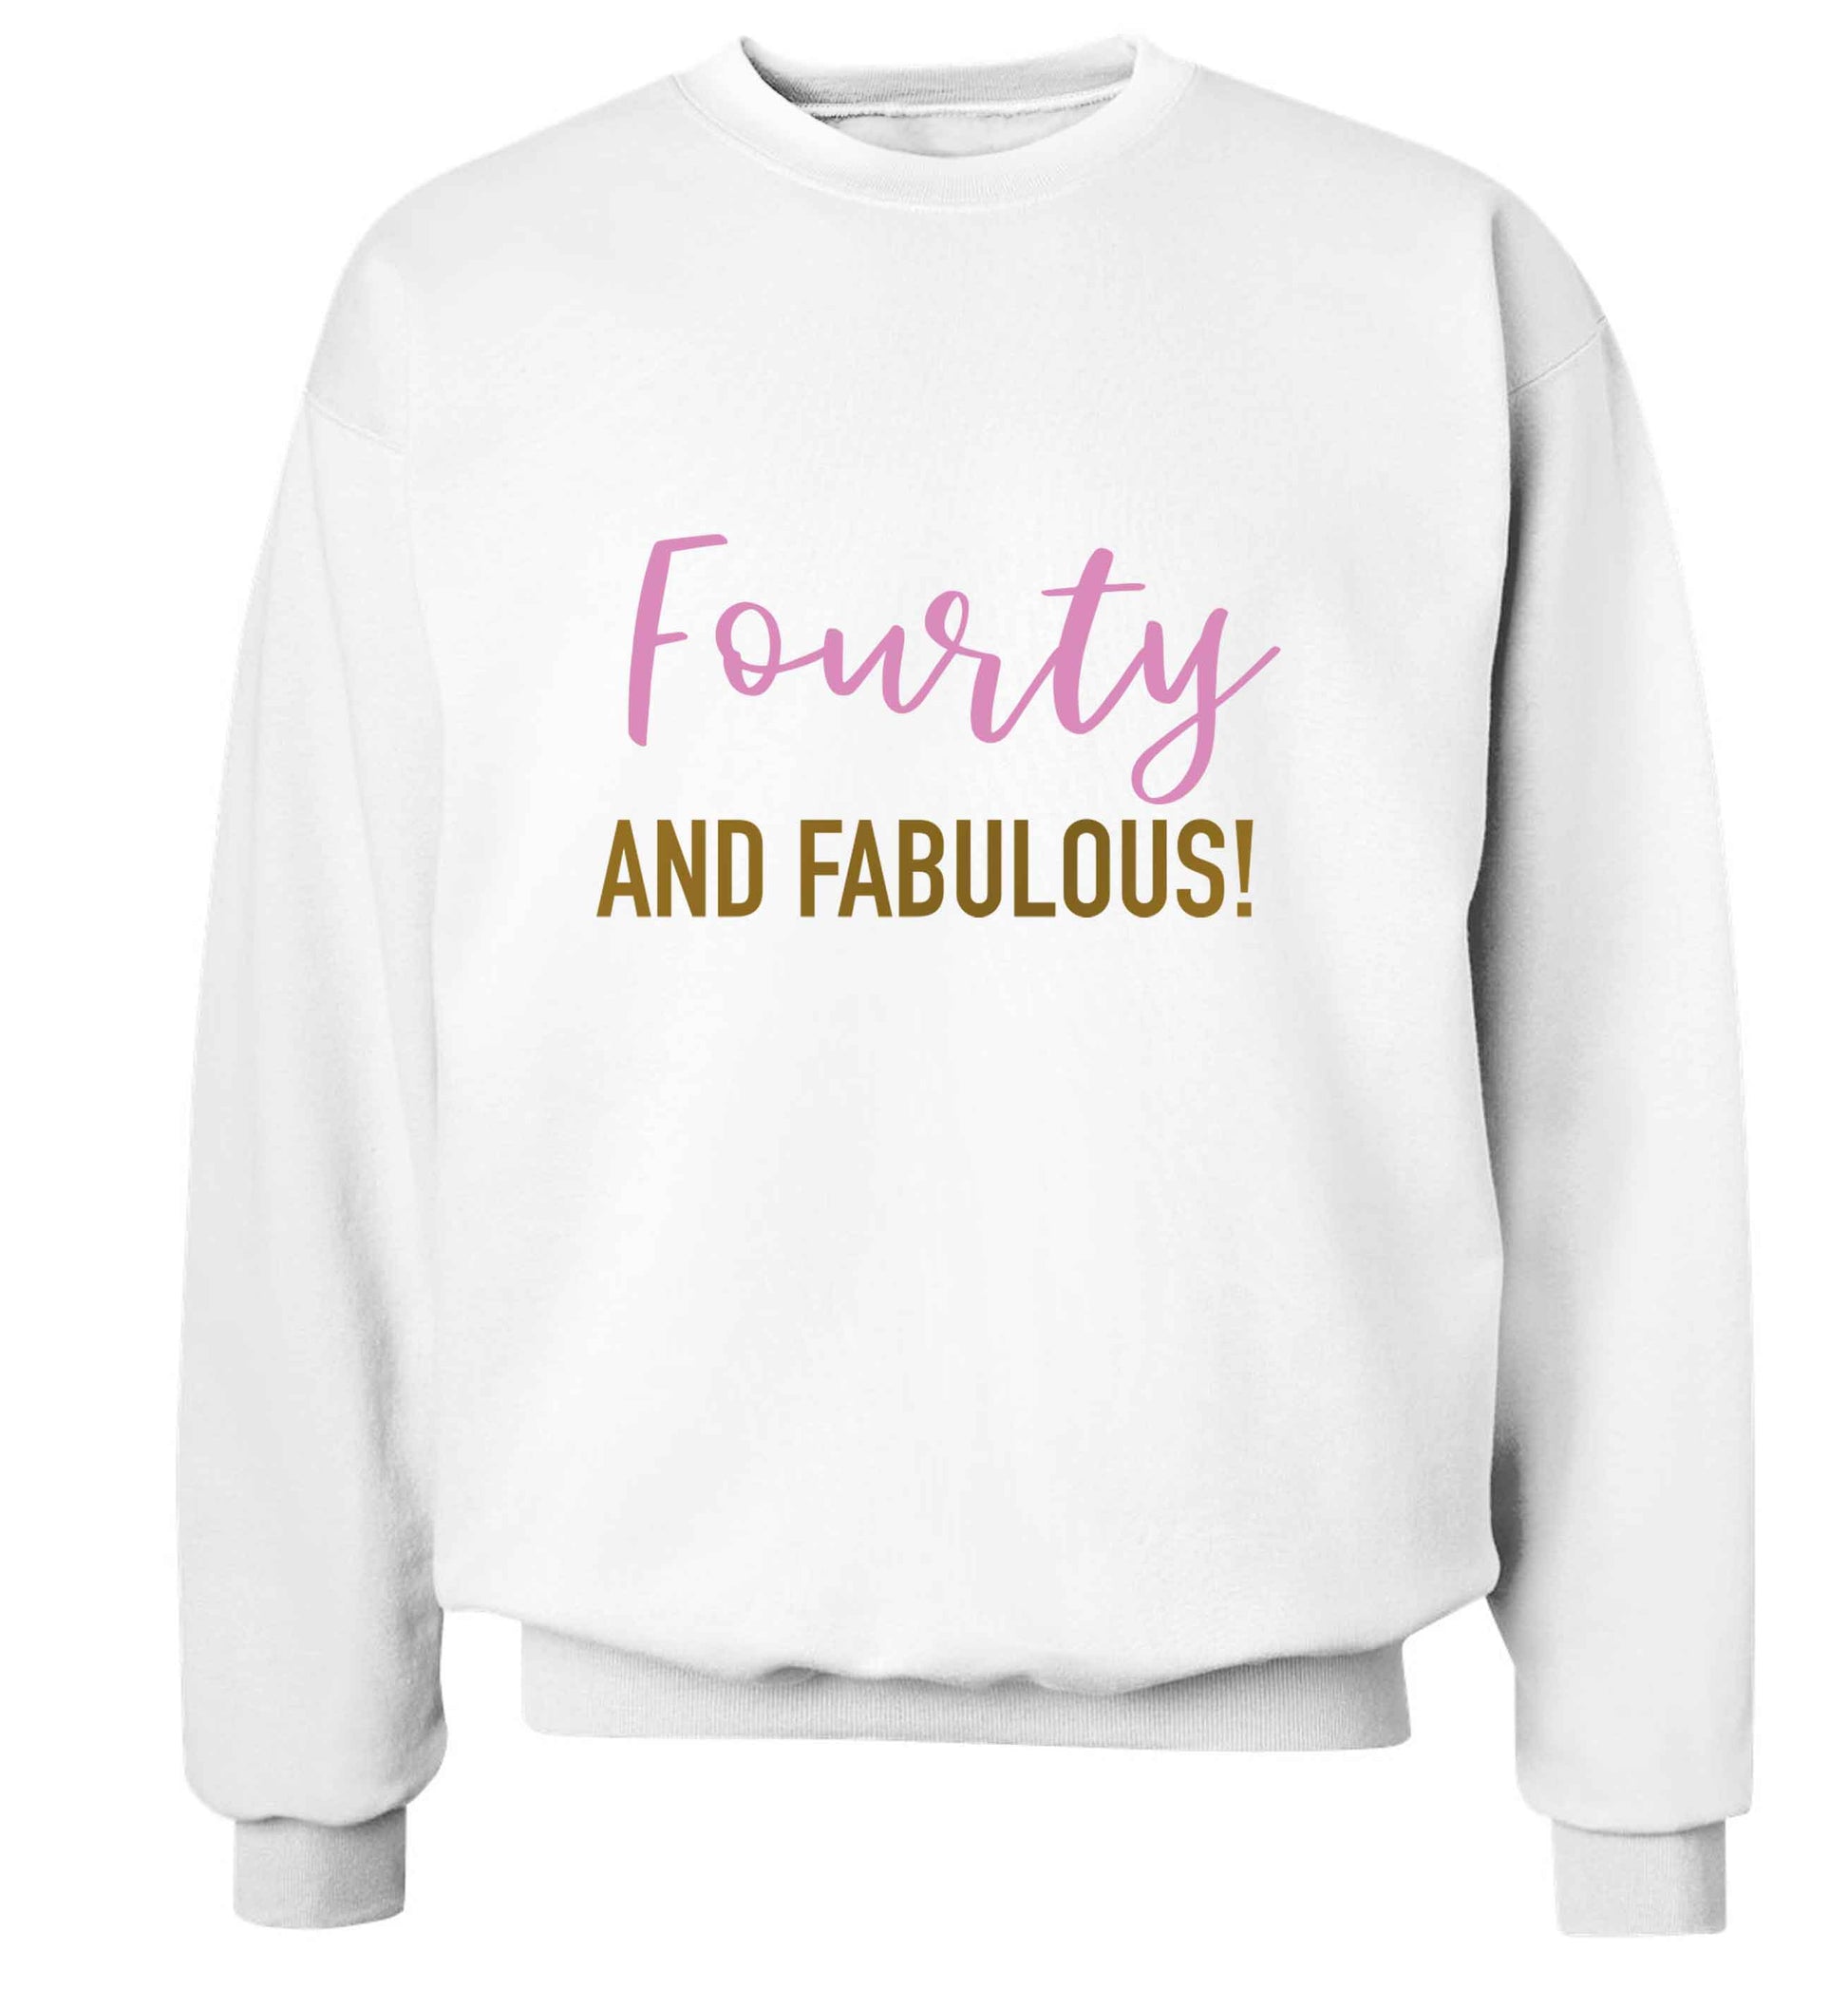 Fourty and fabulous adult's unisex white sweater 2XL